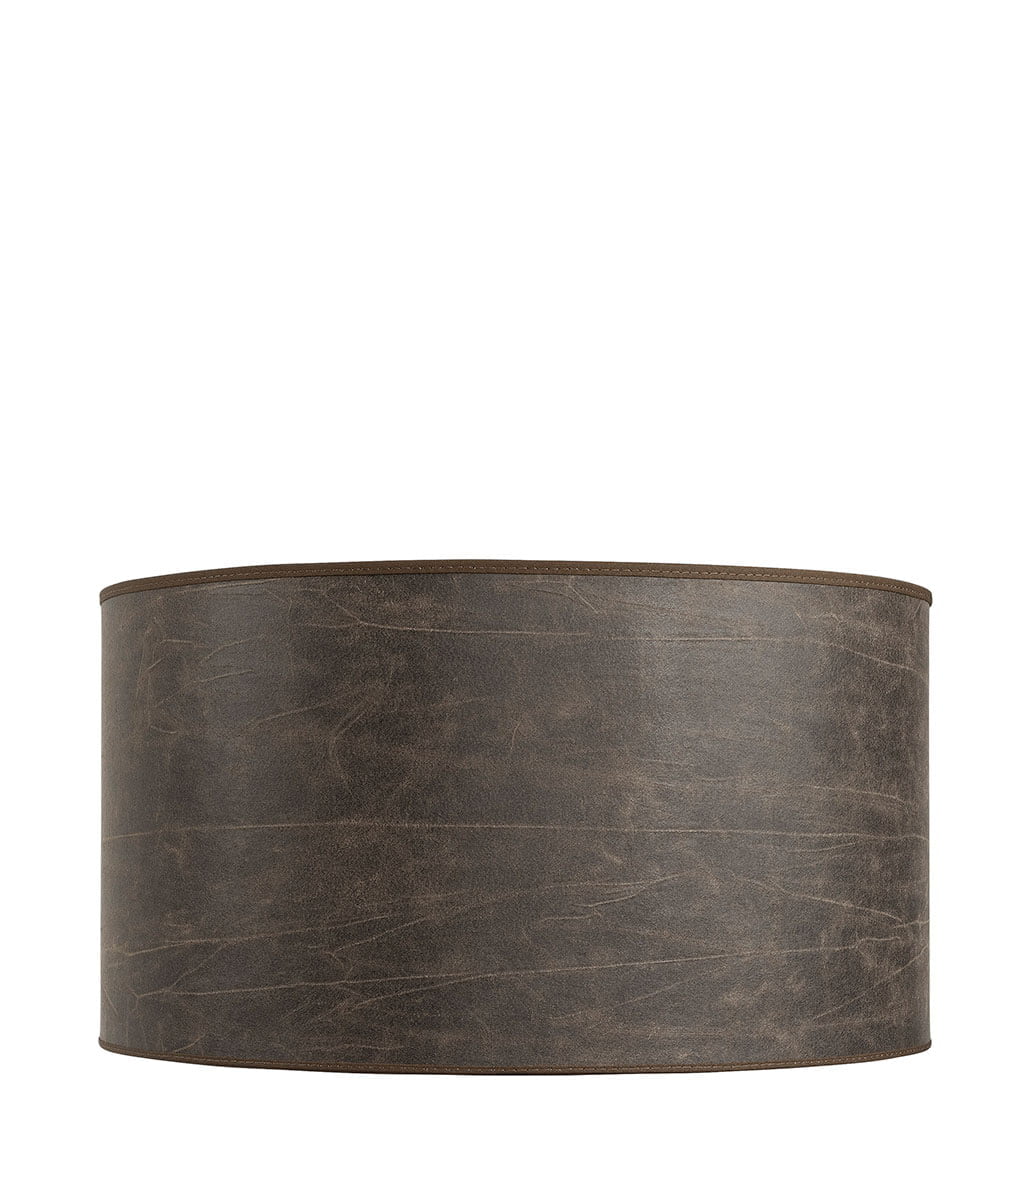 Artwood - Shade Cylinder Leather Pale Brown - Medium